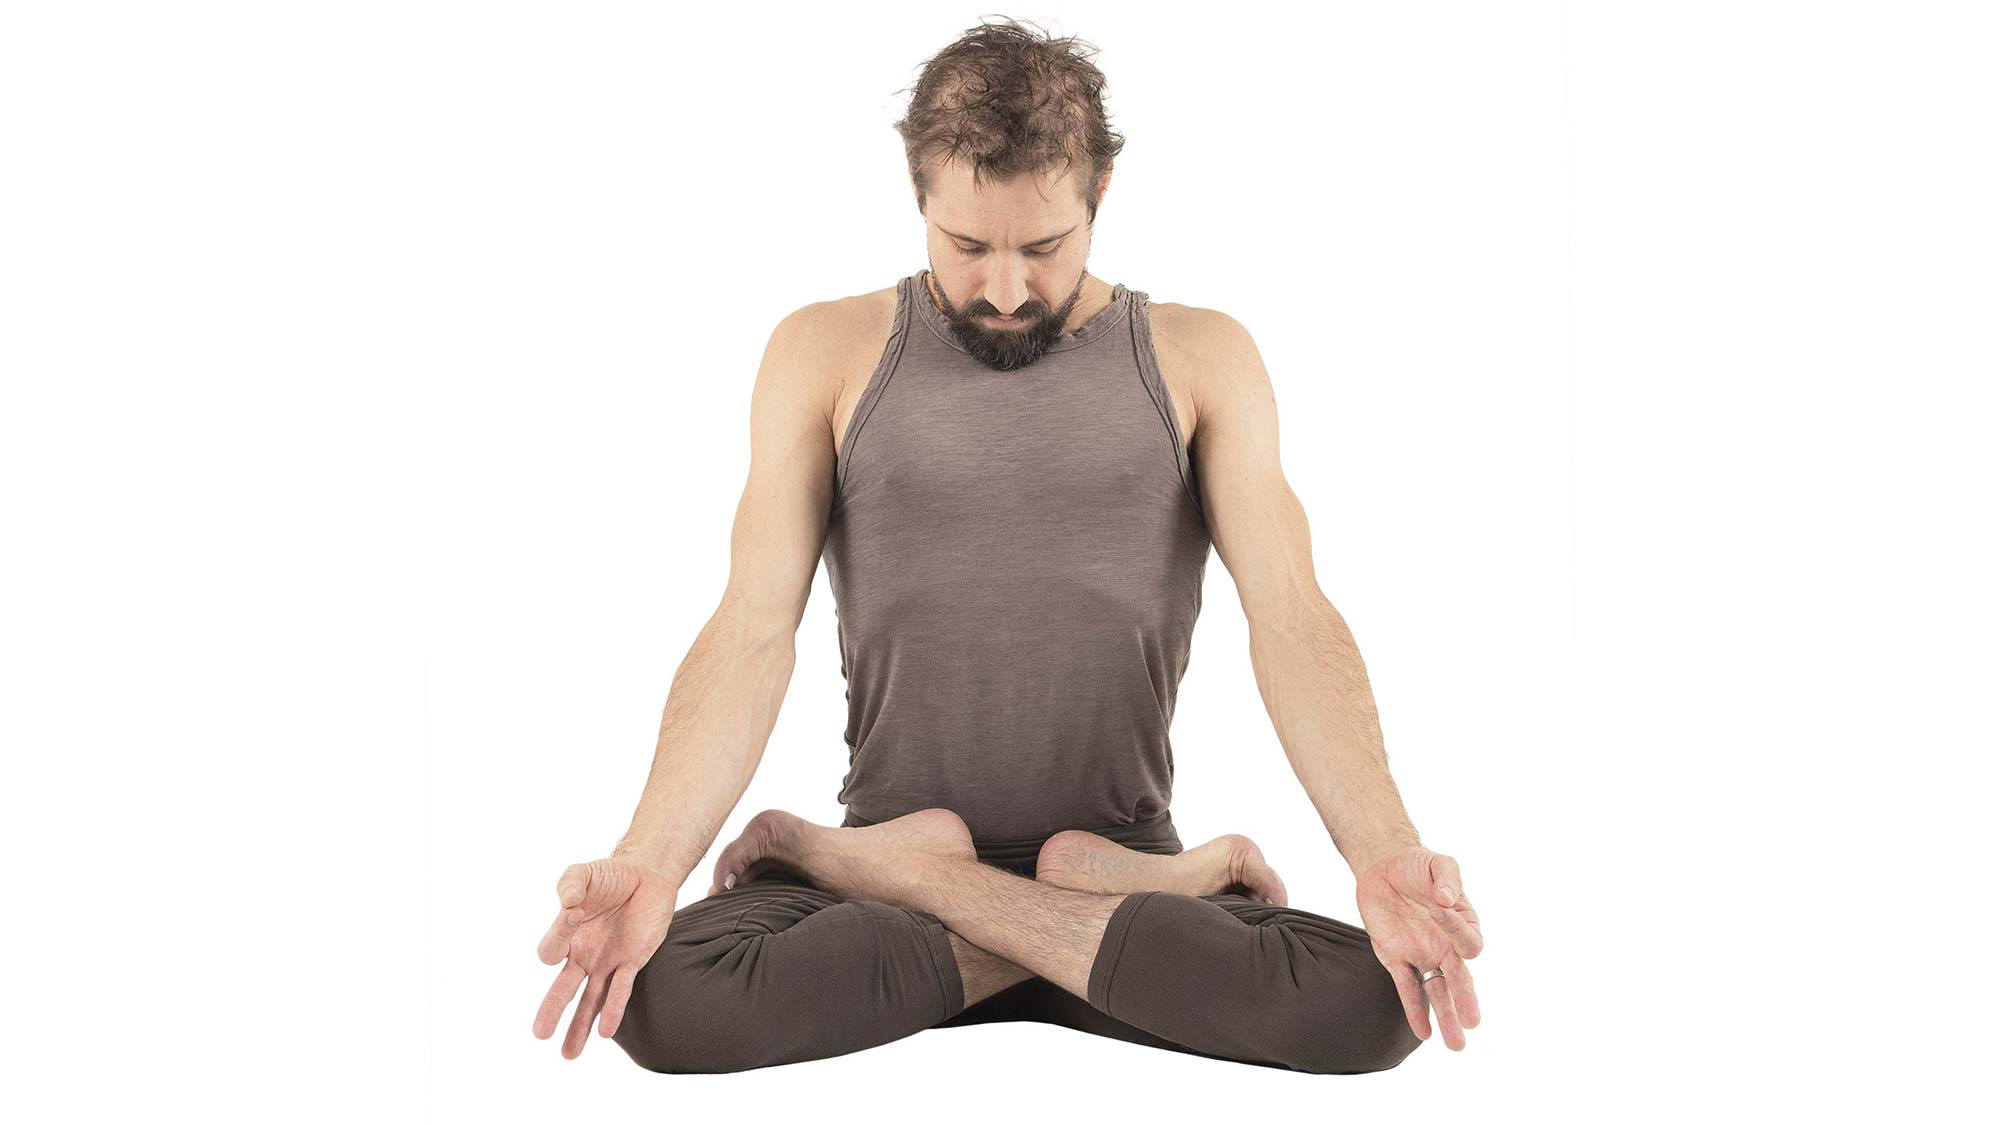 10 Unbelievable Health Benefits of the Lotus Pose